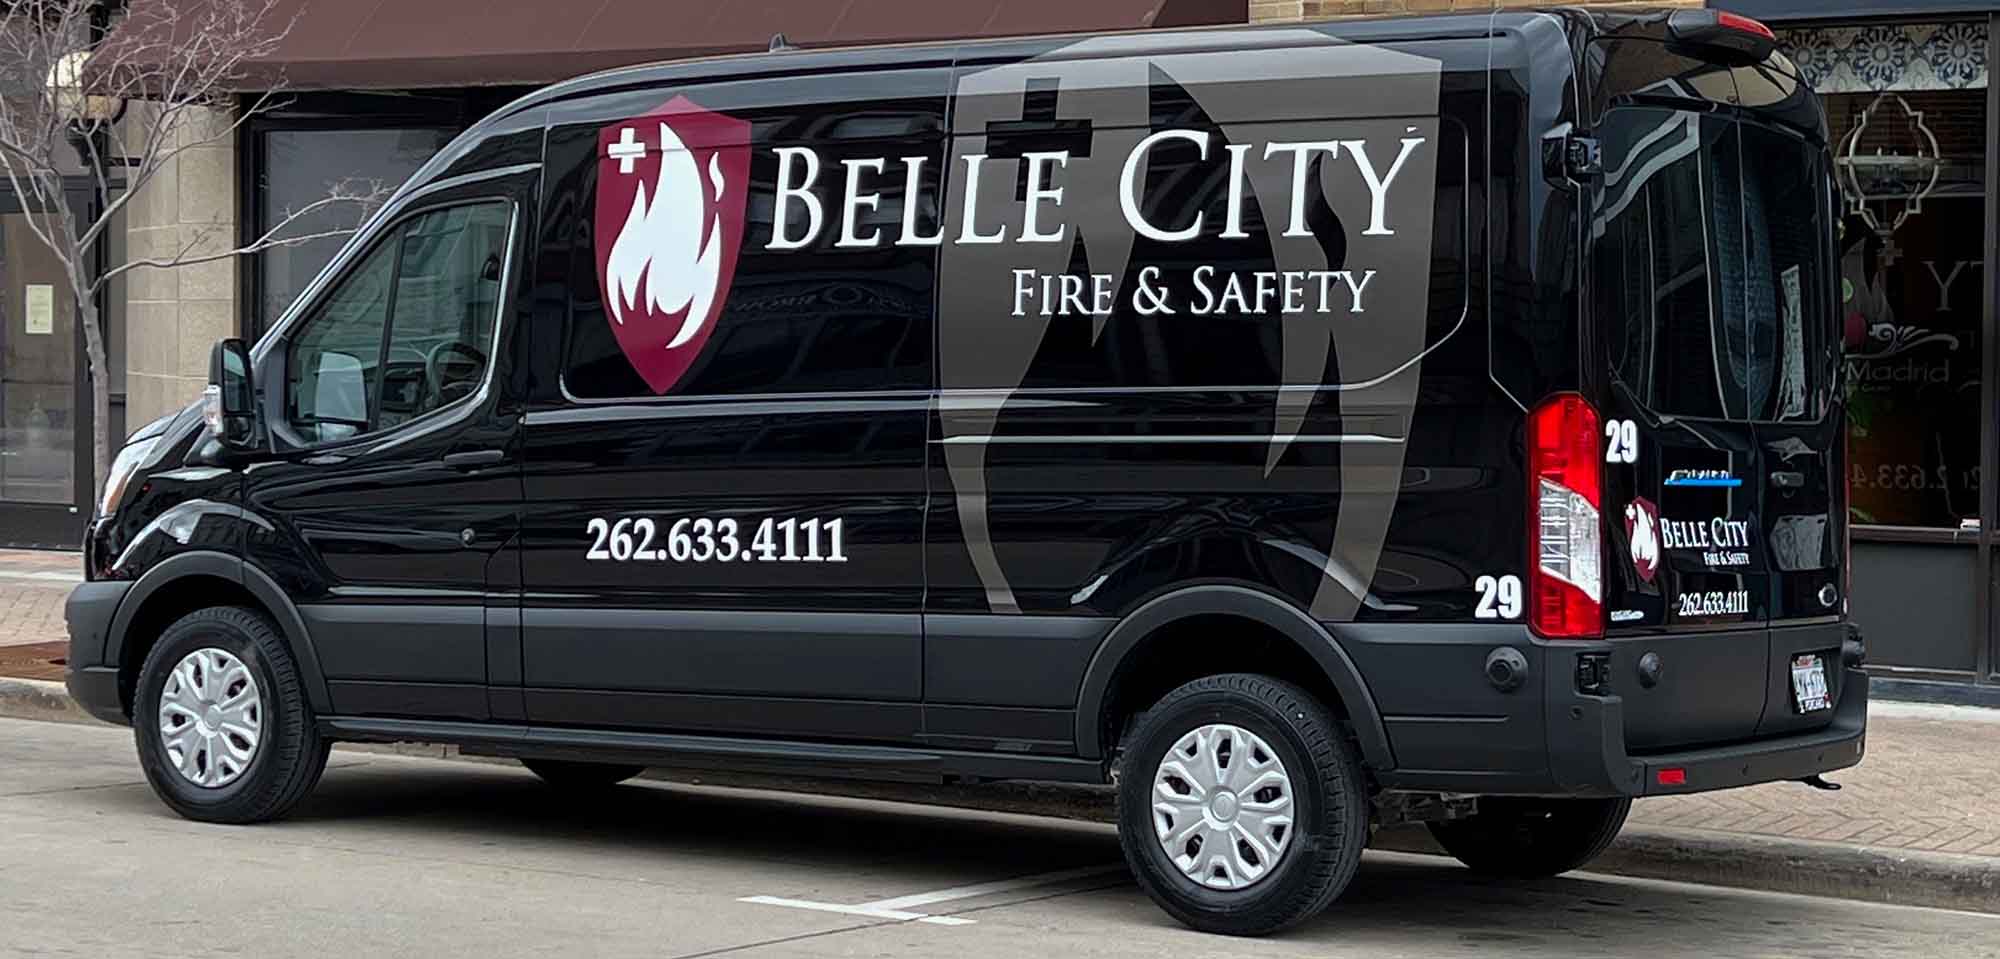 Belle City Electric Vehicle